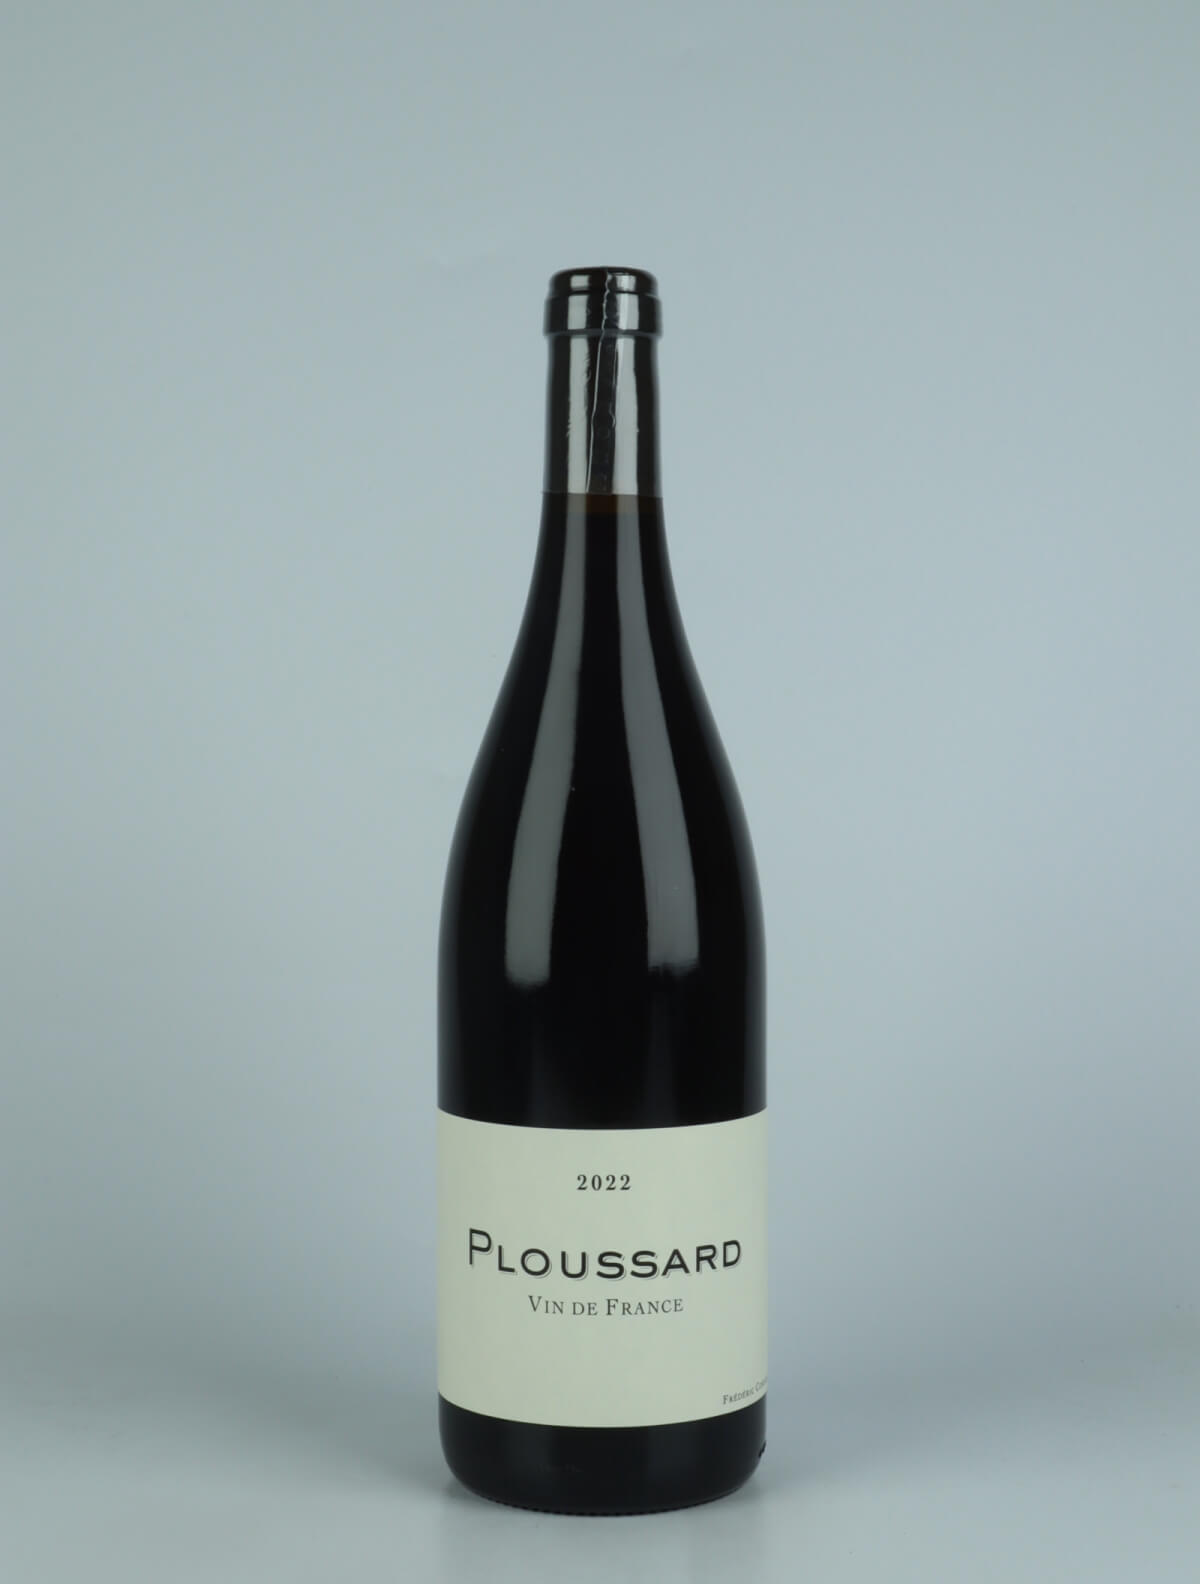 A bottle 2022 Ploussard Red wine from Frédéric Cossard, Jura in France